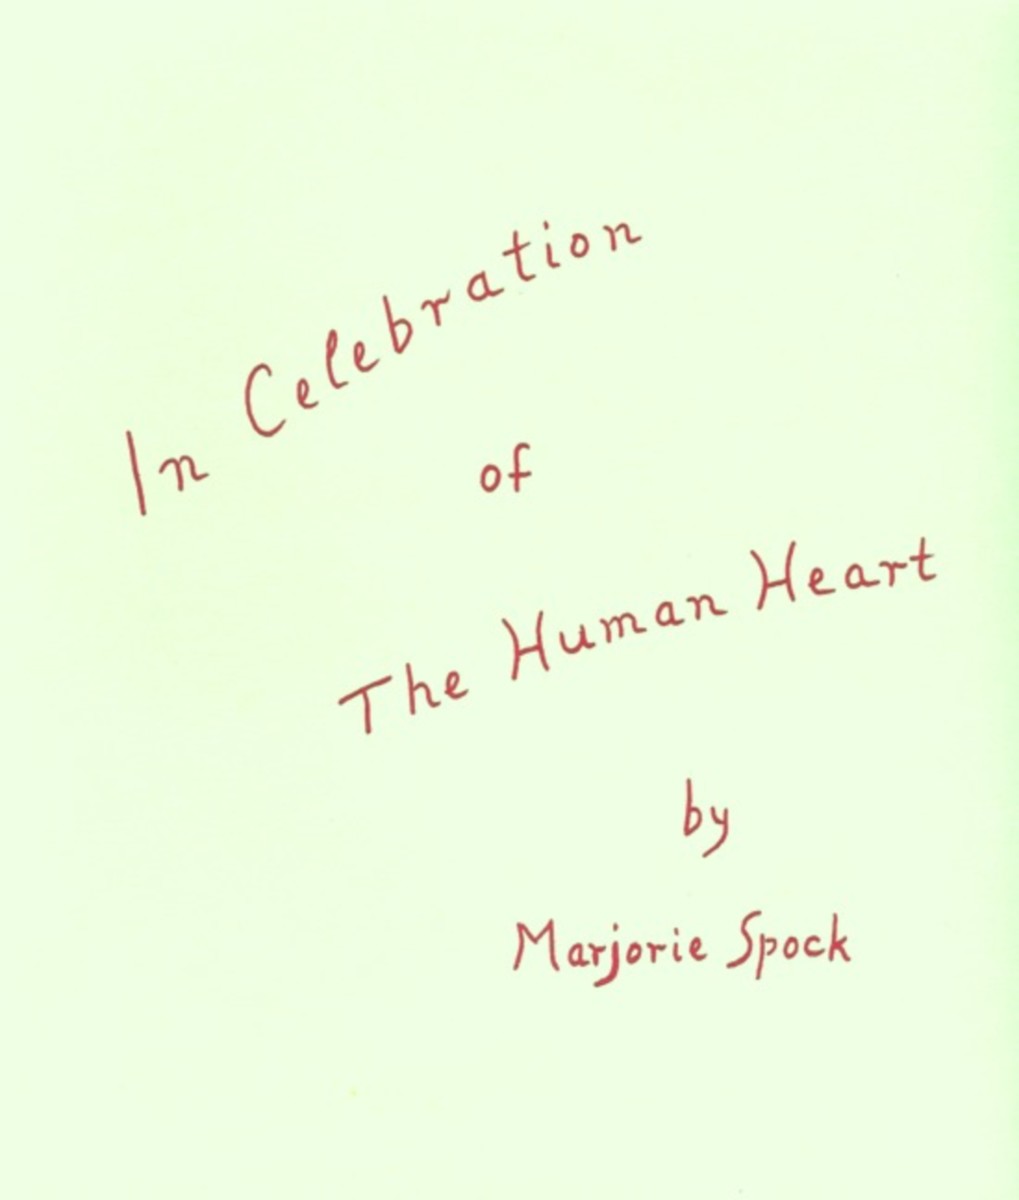 In Celebration of the Human Heart